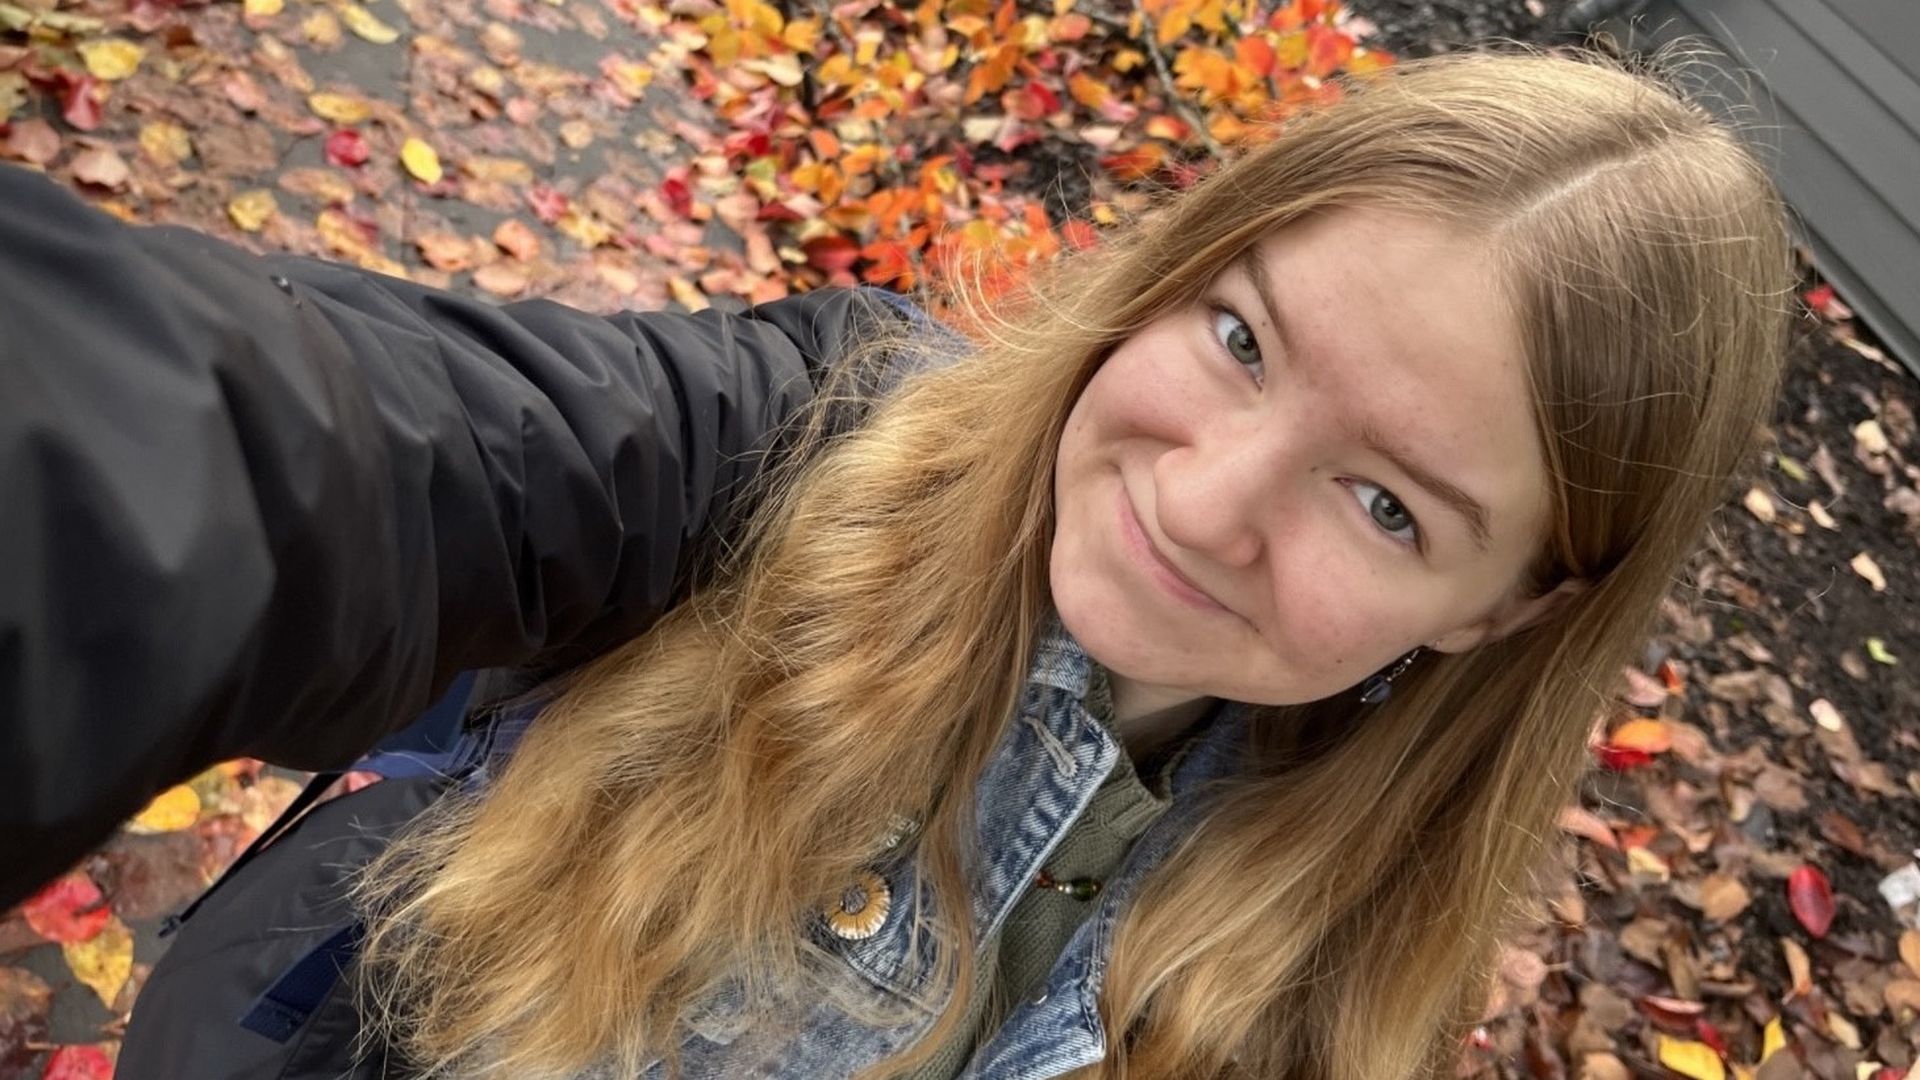 A girl with blondish hair past her shoulders smiles in a selfie. The sidewalk behind is wet and covered in small orange and red leaves.